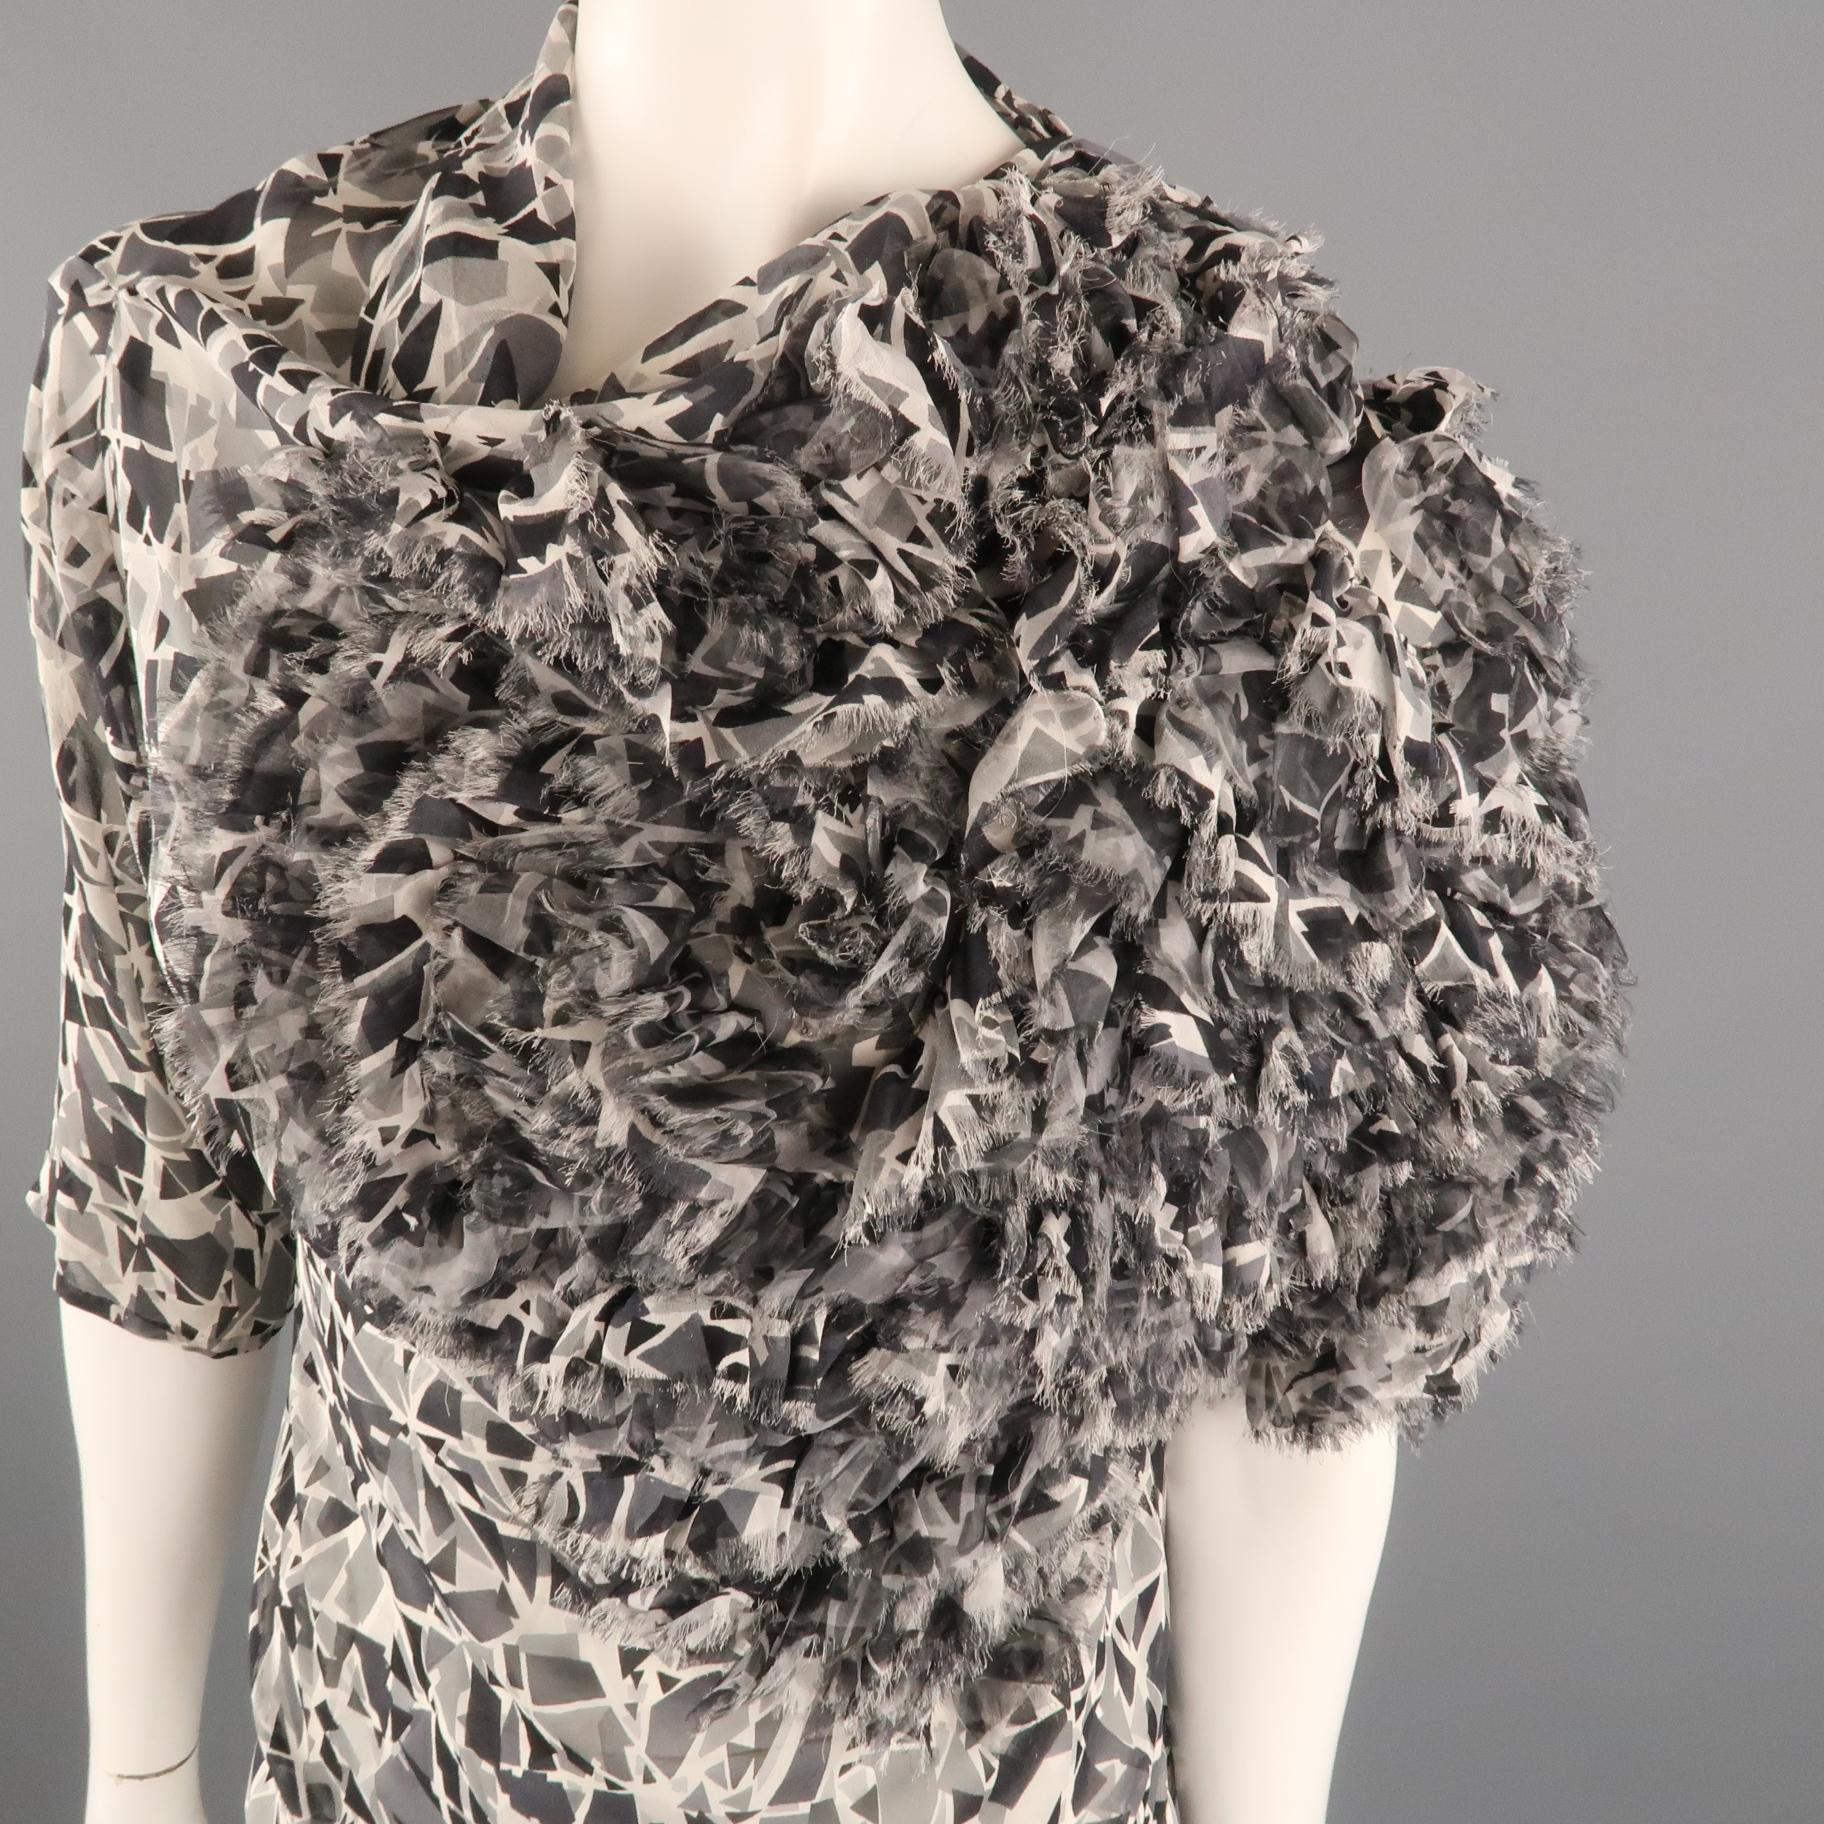 DRIES VAN NOTEN blouse come in gray geometric print silk chiffon with a high draped neck, short sleeves, oversized silhouette, and fringed applique shoulder.
 
Excellent Pre-Owned Condition.
Marked: IT 40
 
Measurements:
 
Shoulder: 17 in.
Bust: 38